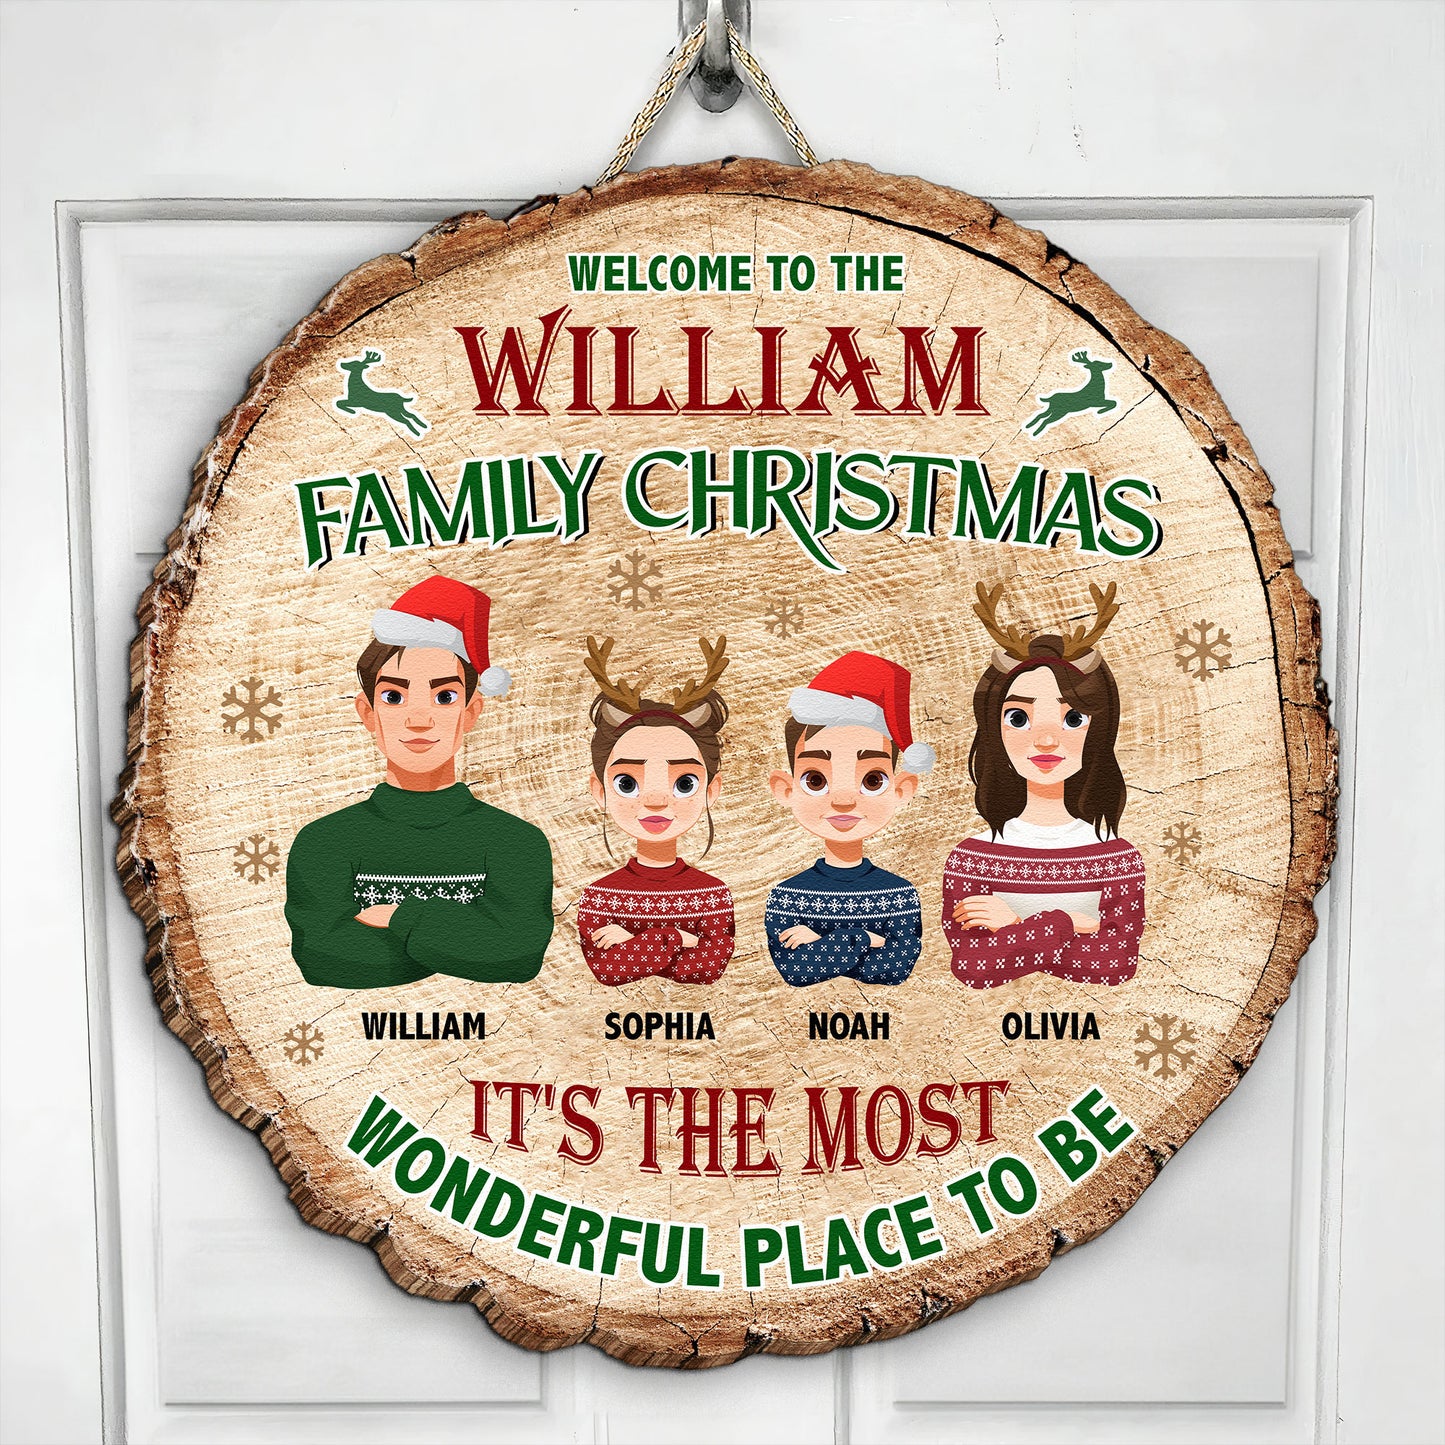 It's The Most Wonderful Place To Be - Personalized Wood Sign